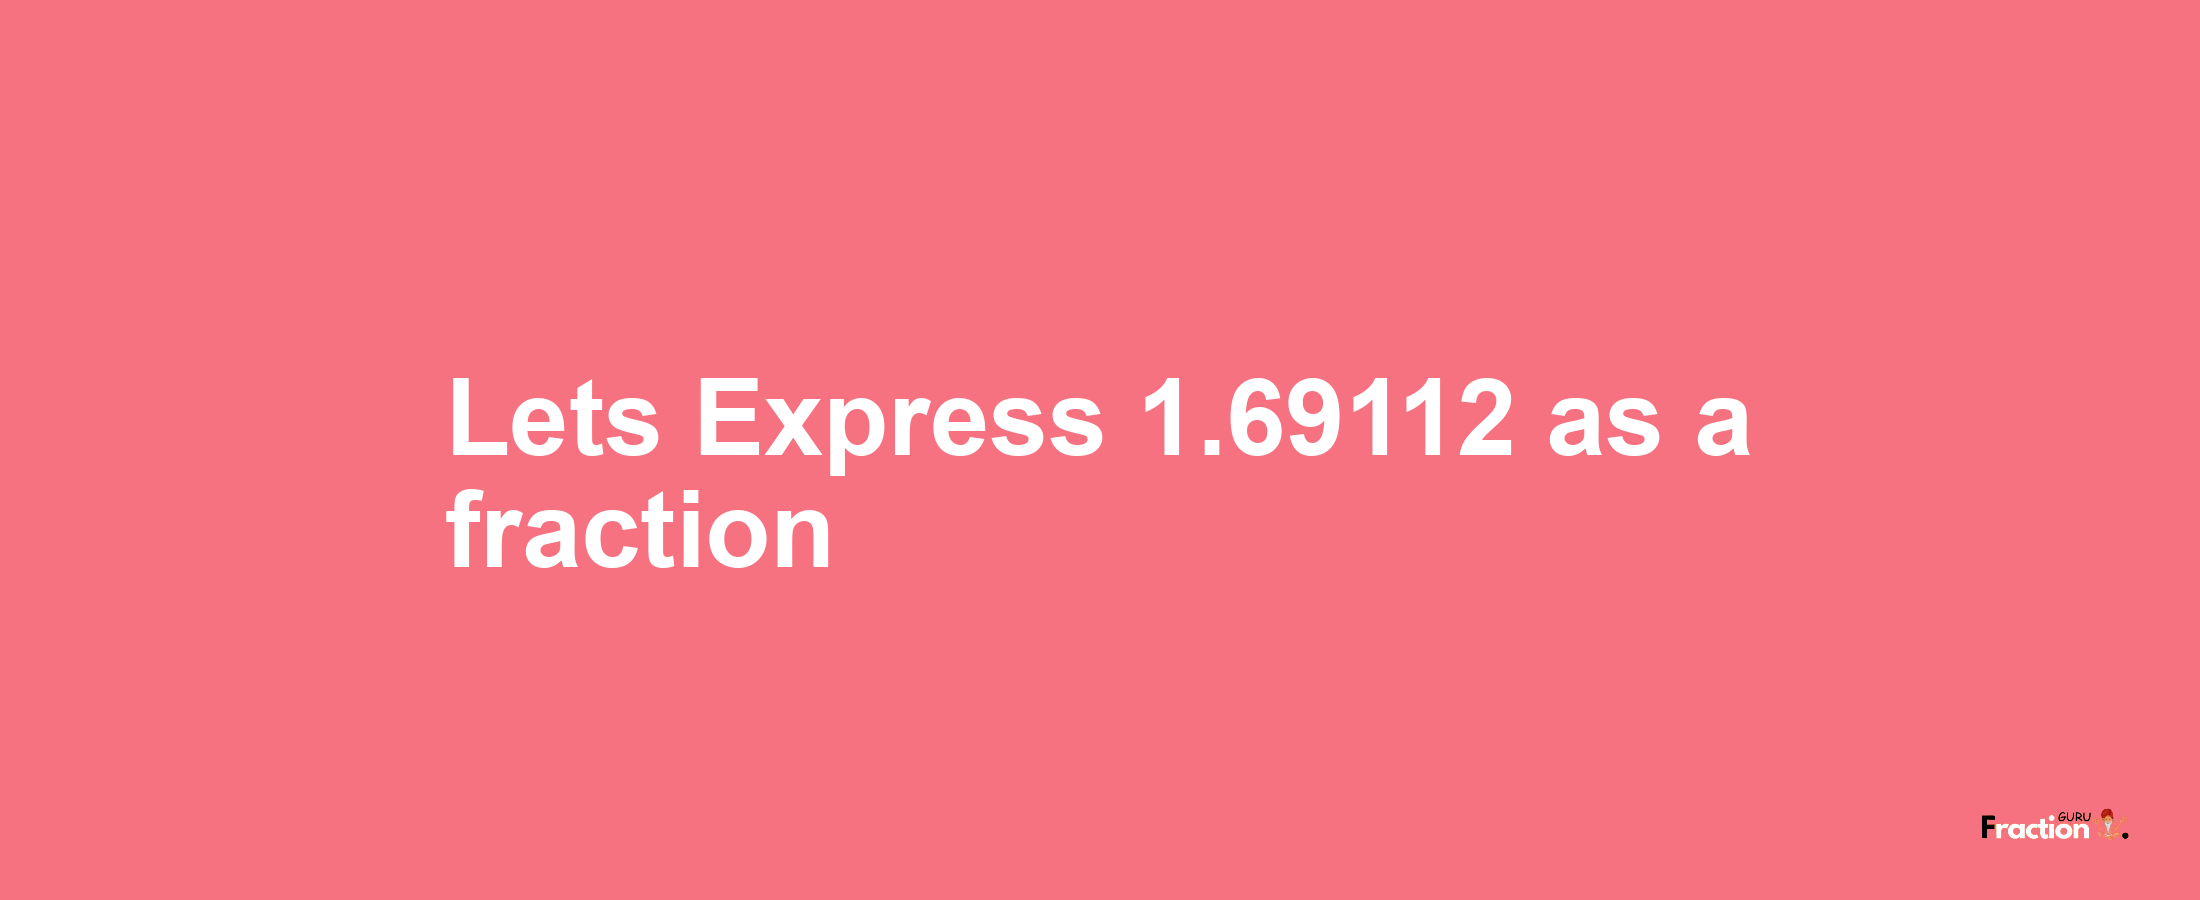 Lets Express 1.69112 as afraction